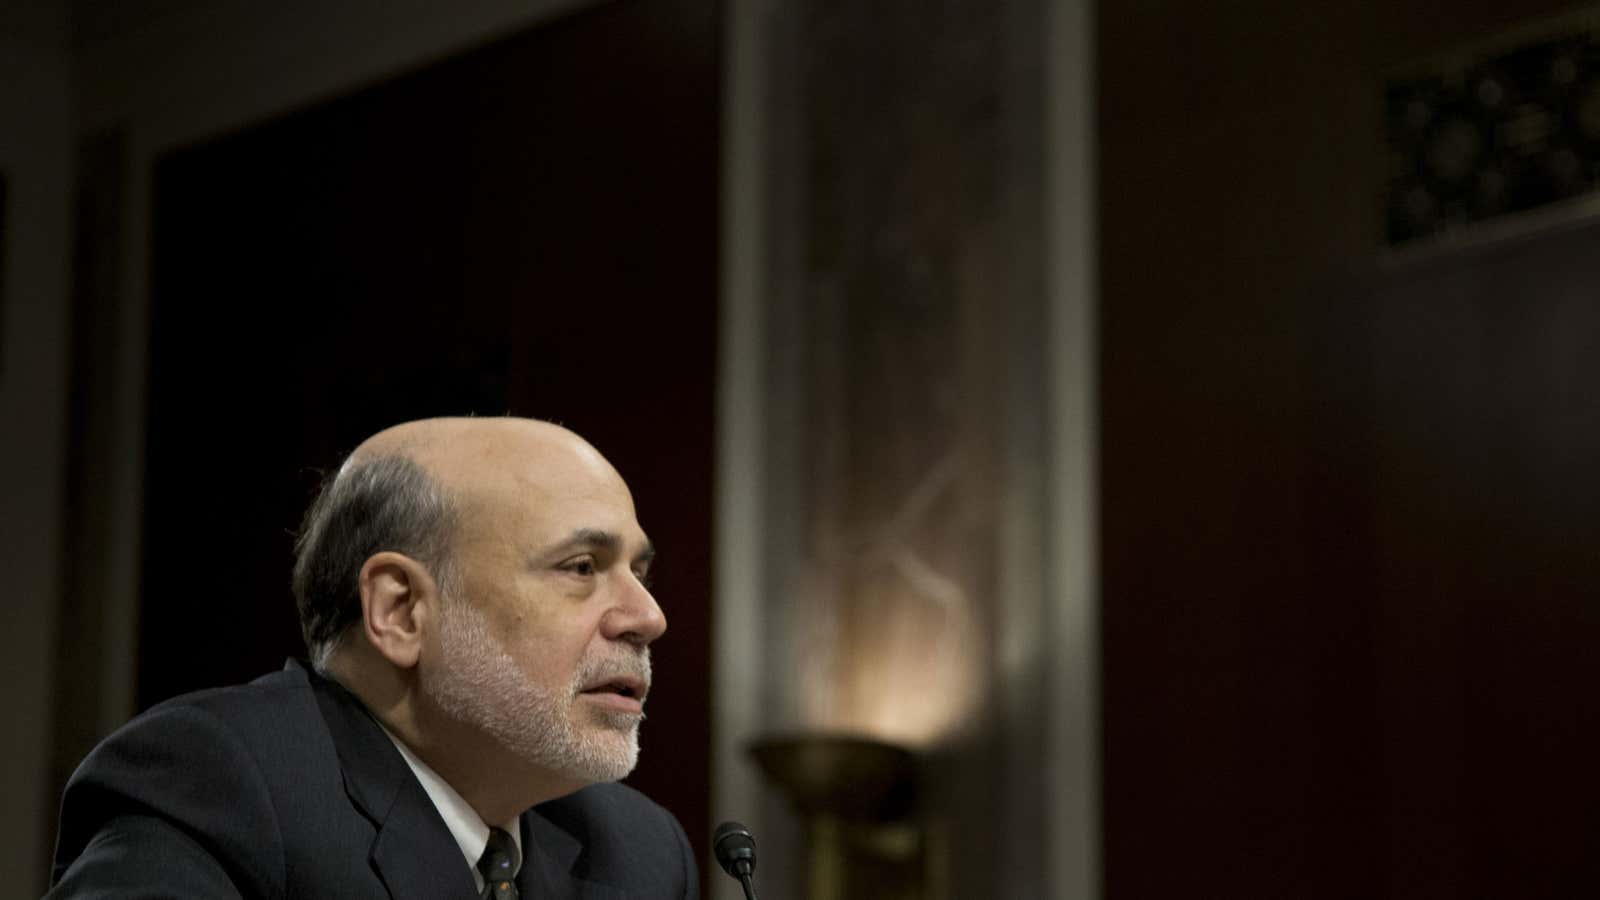 Federal Reserve Chairman Ben Bernanke testifies on Capitol Hill in Washington, Wednesday, May 22, 2013 before the Joint Economic Committee hearing on “The Economic Outlook”.…